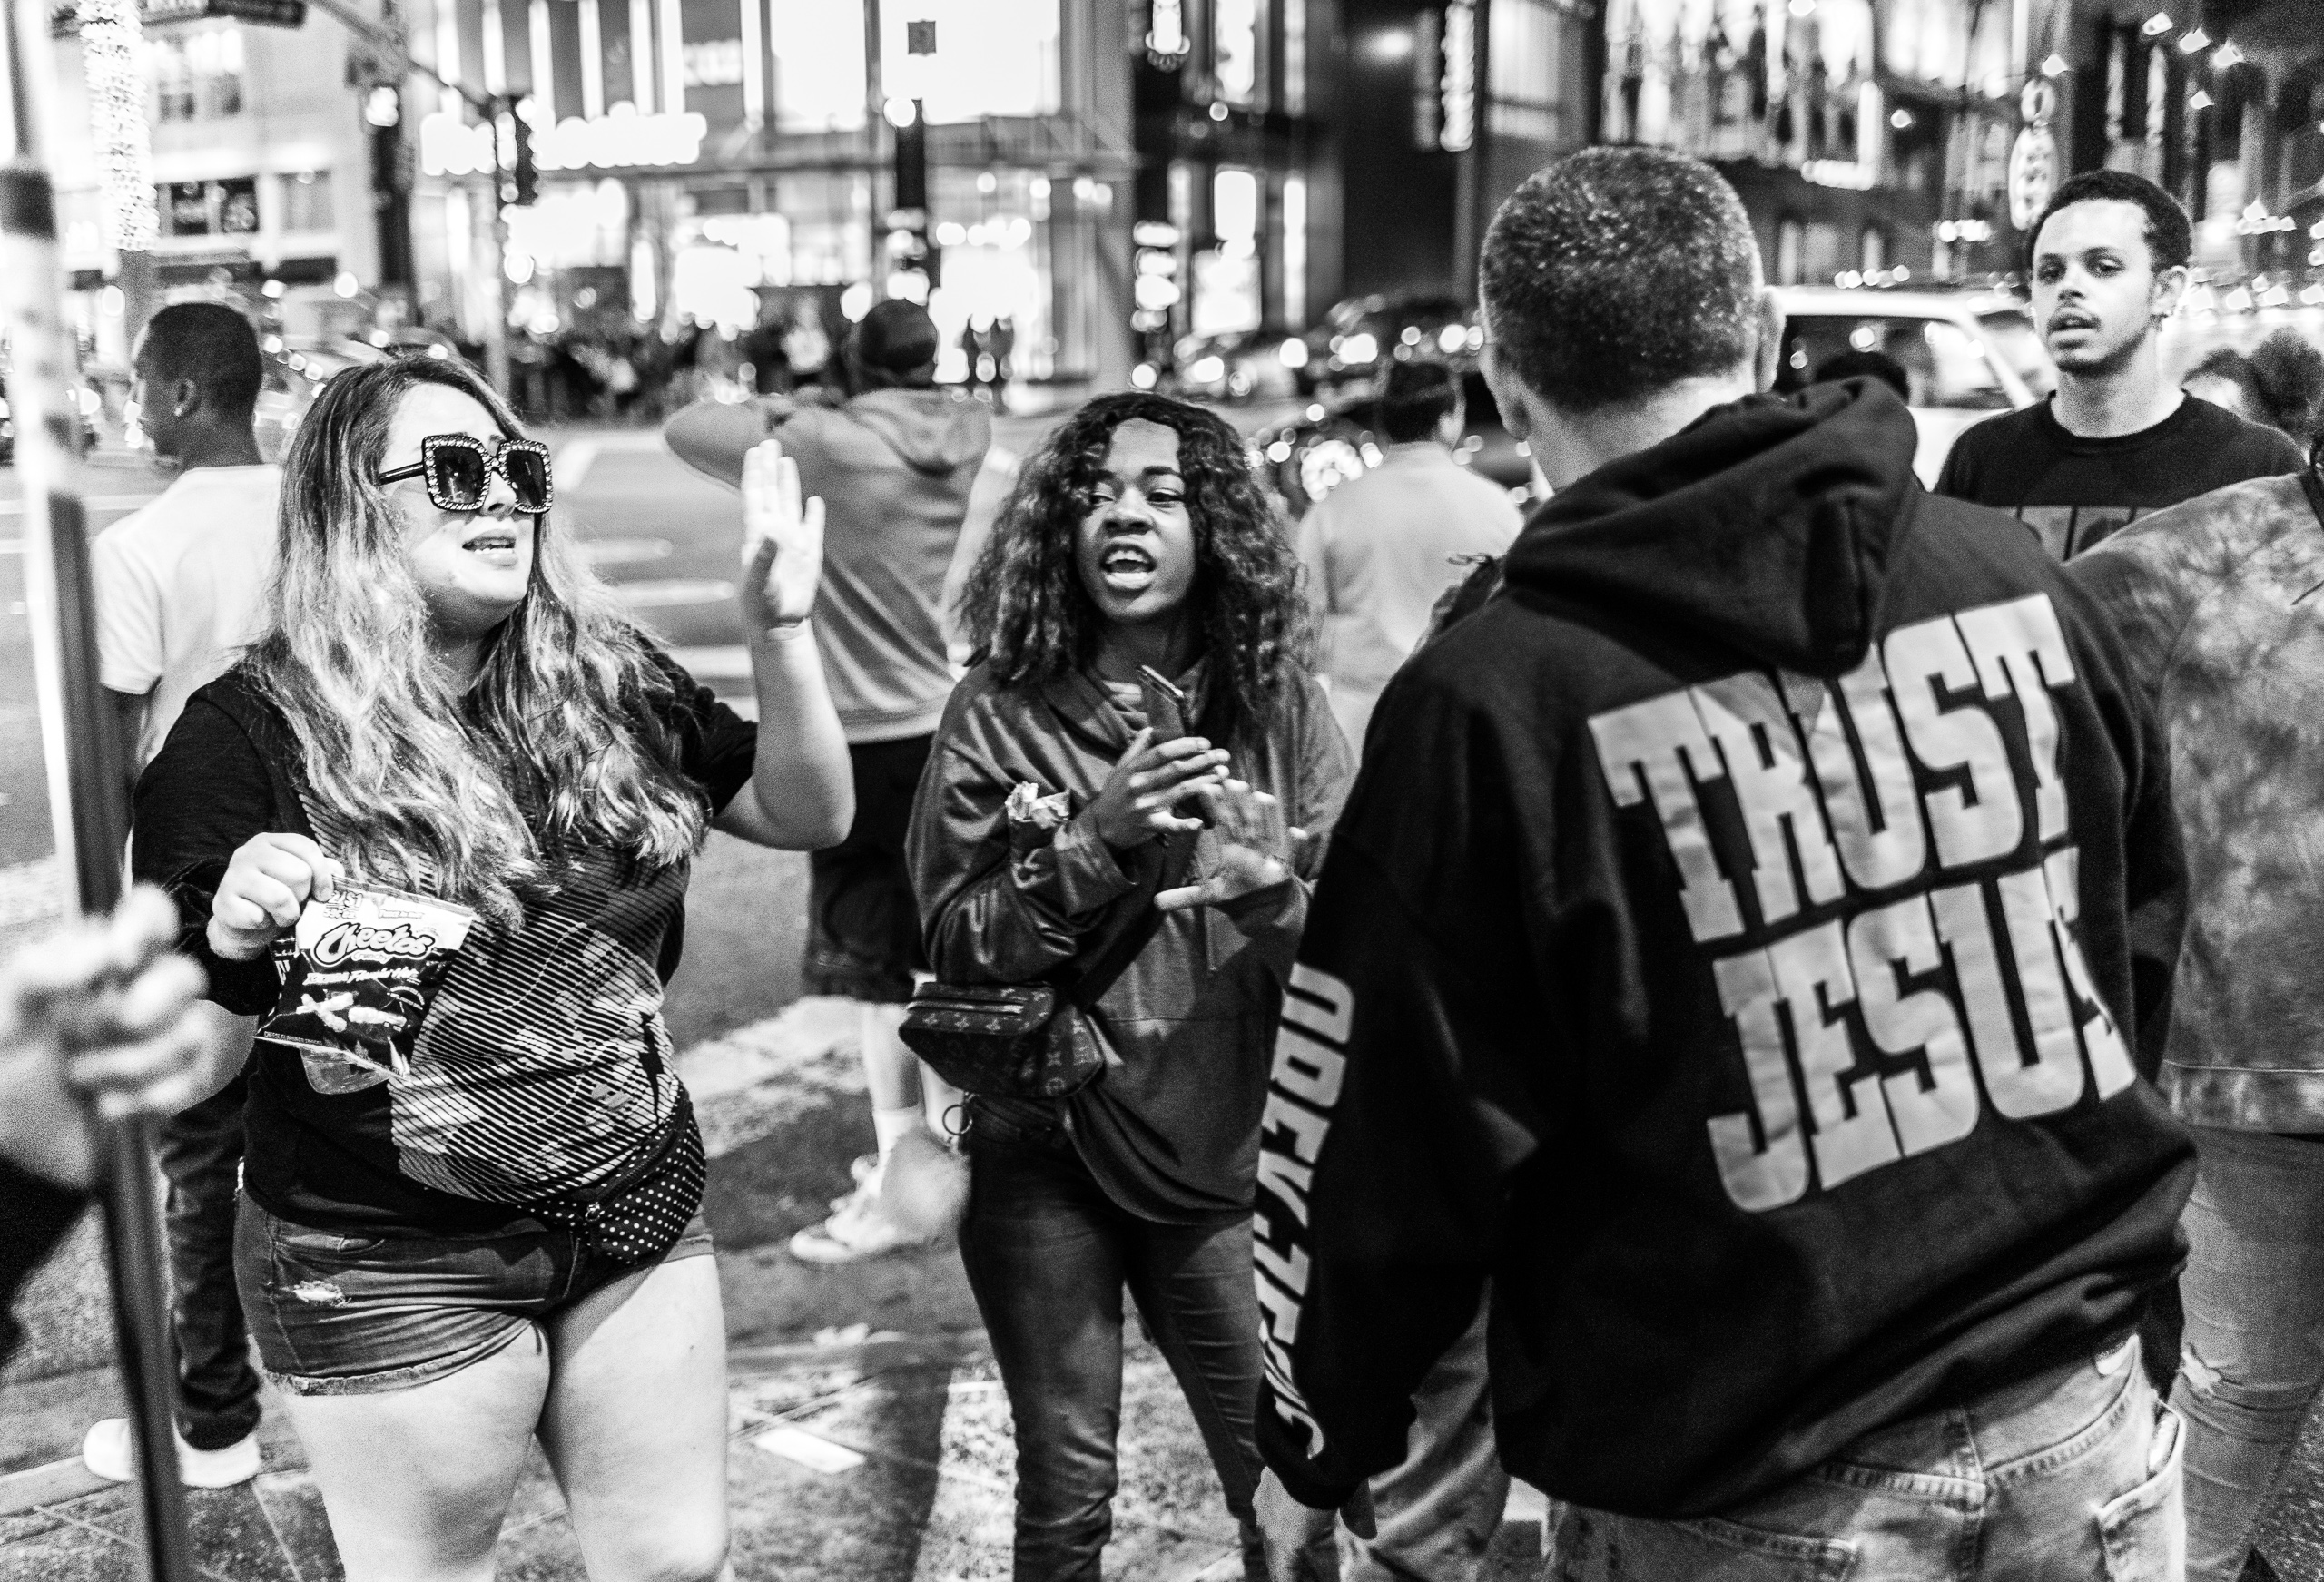 a woman with rhinestone sunglasses has a shouting match with a preacher in a "trust Jesus" hoodie